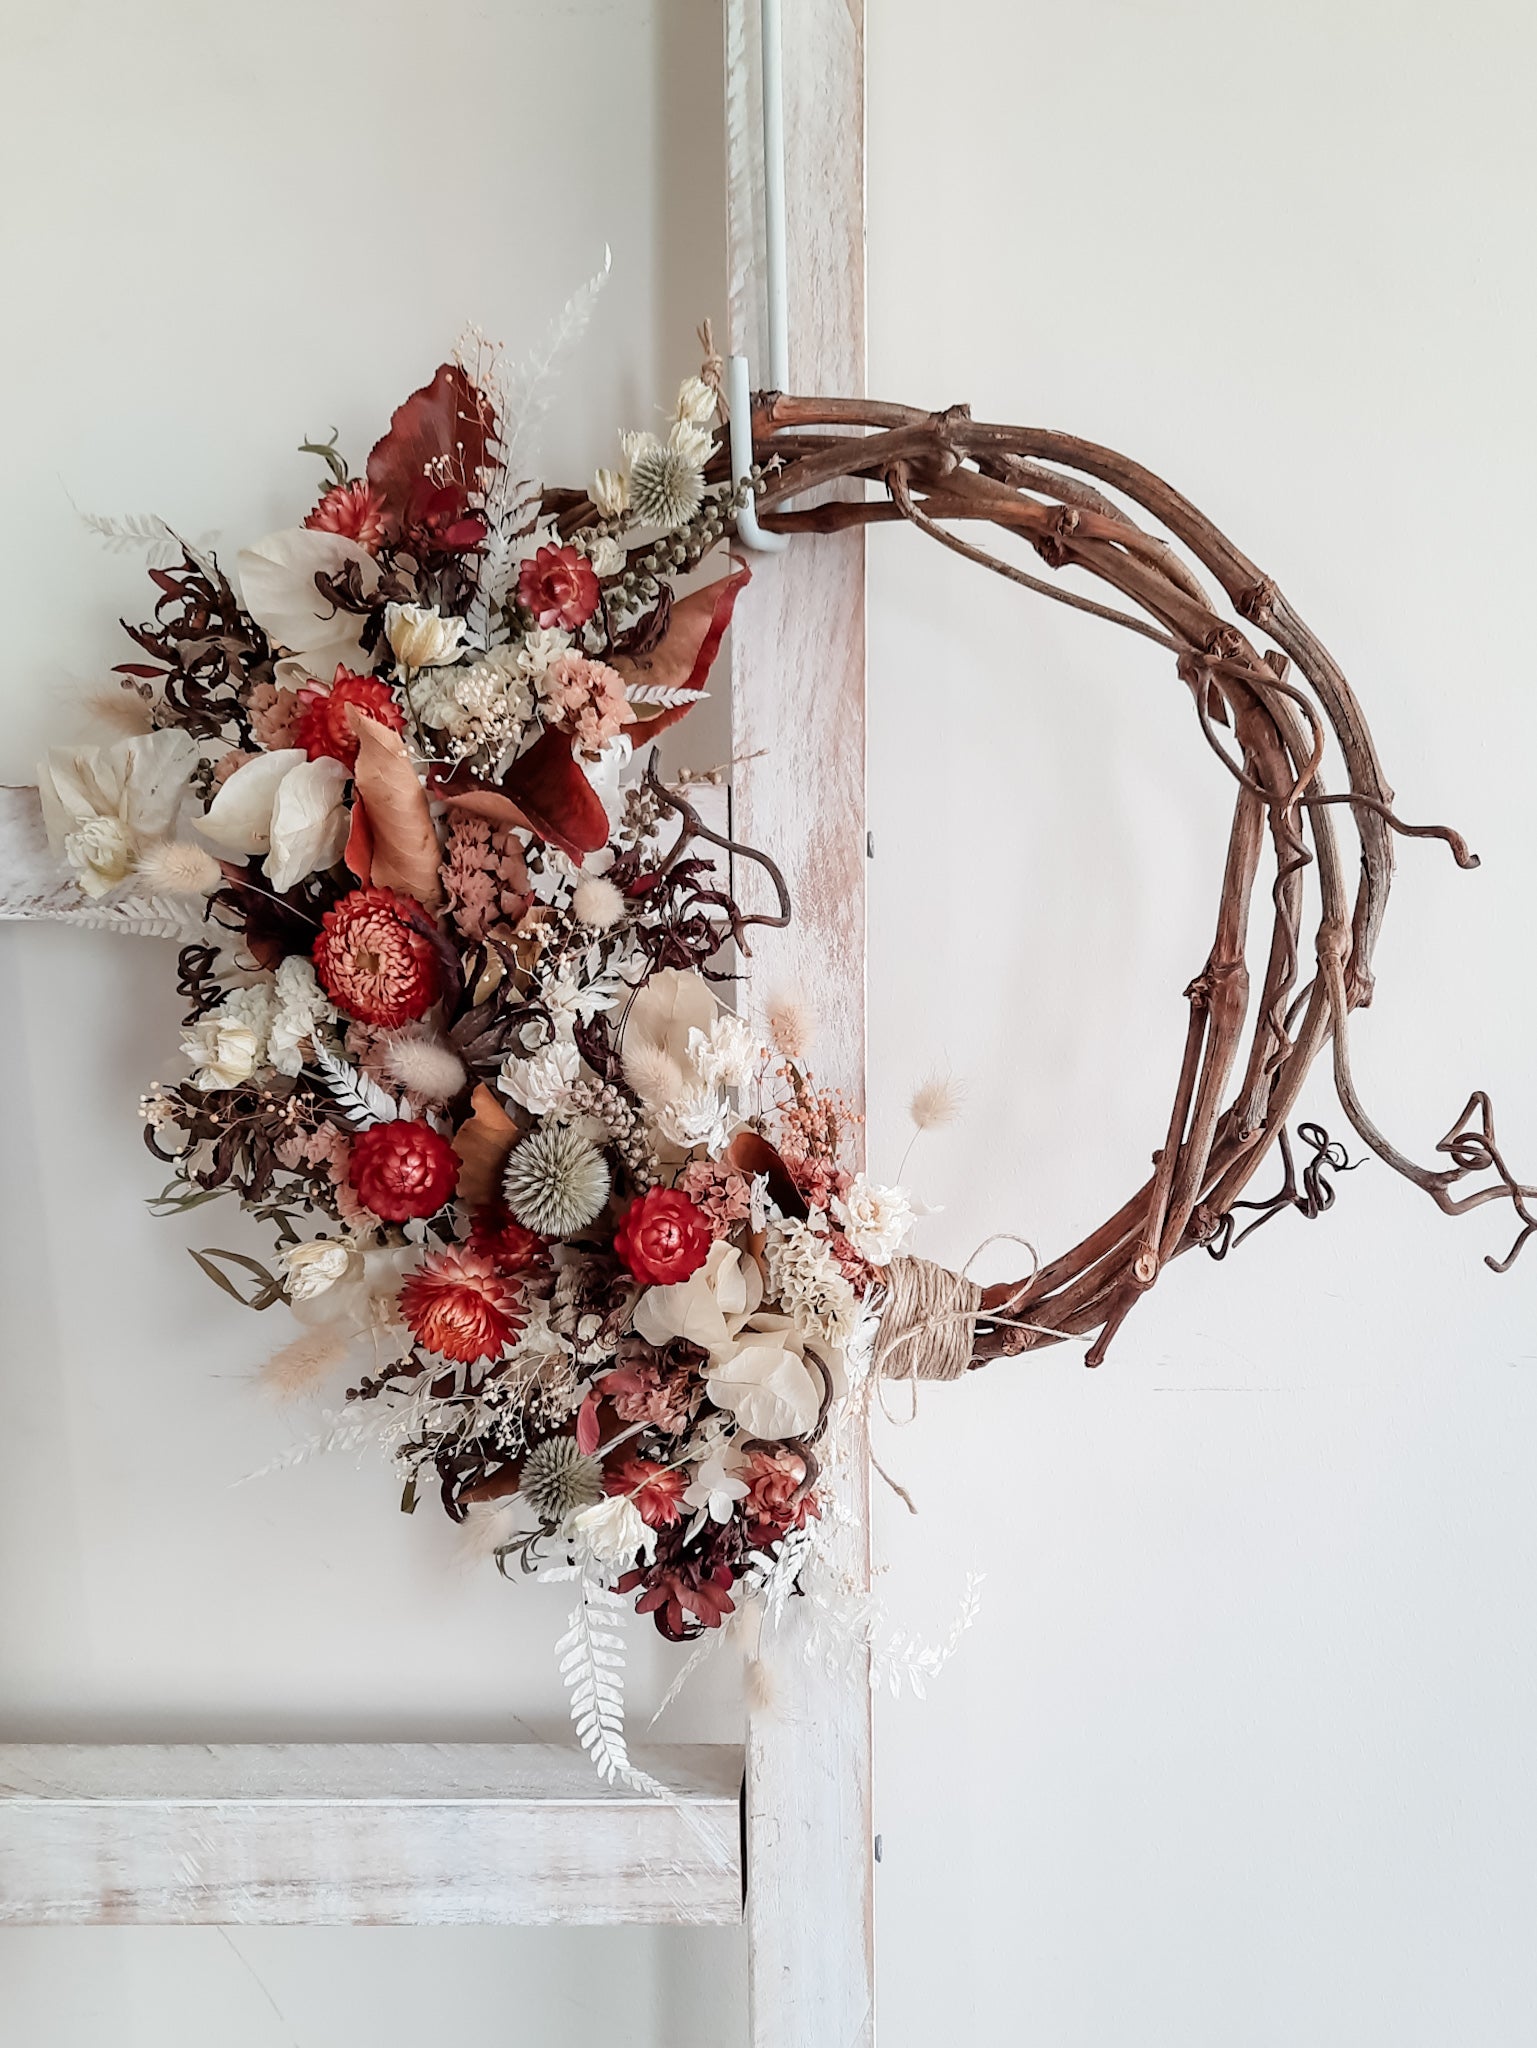 Dried flower wreath in rich reds and neutrals on a grapevine base.